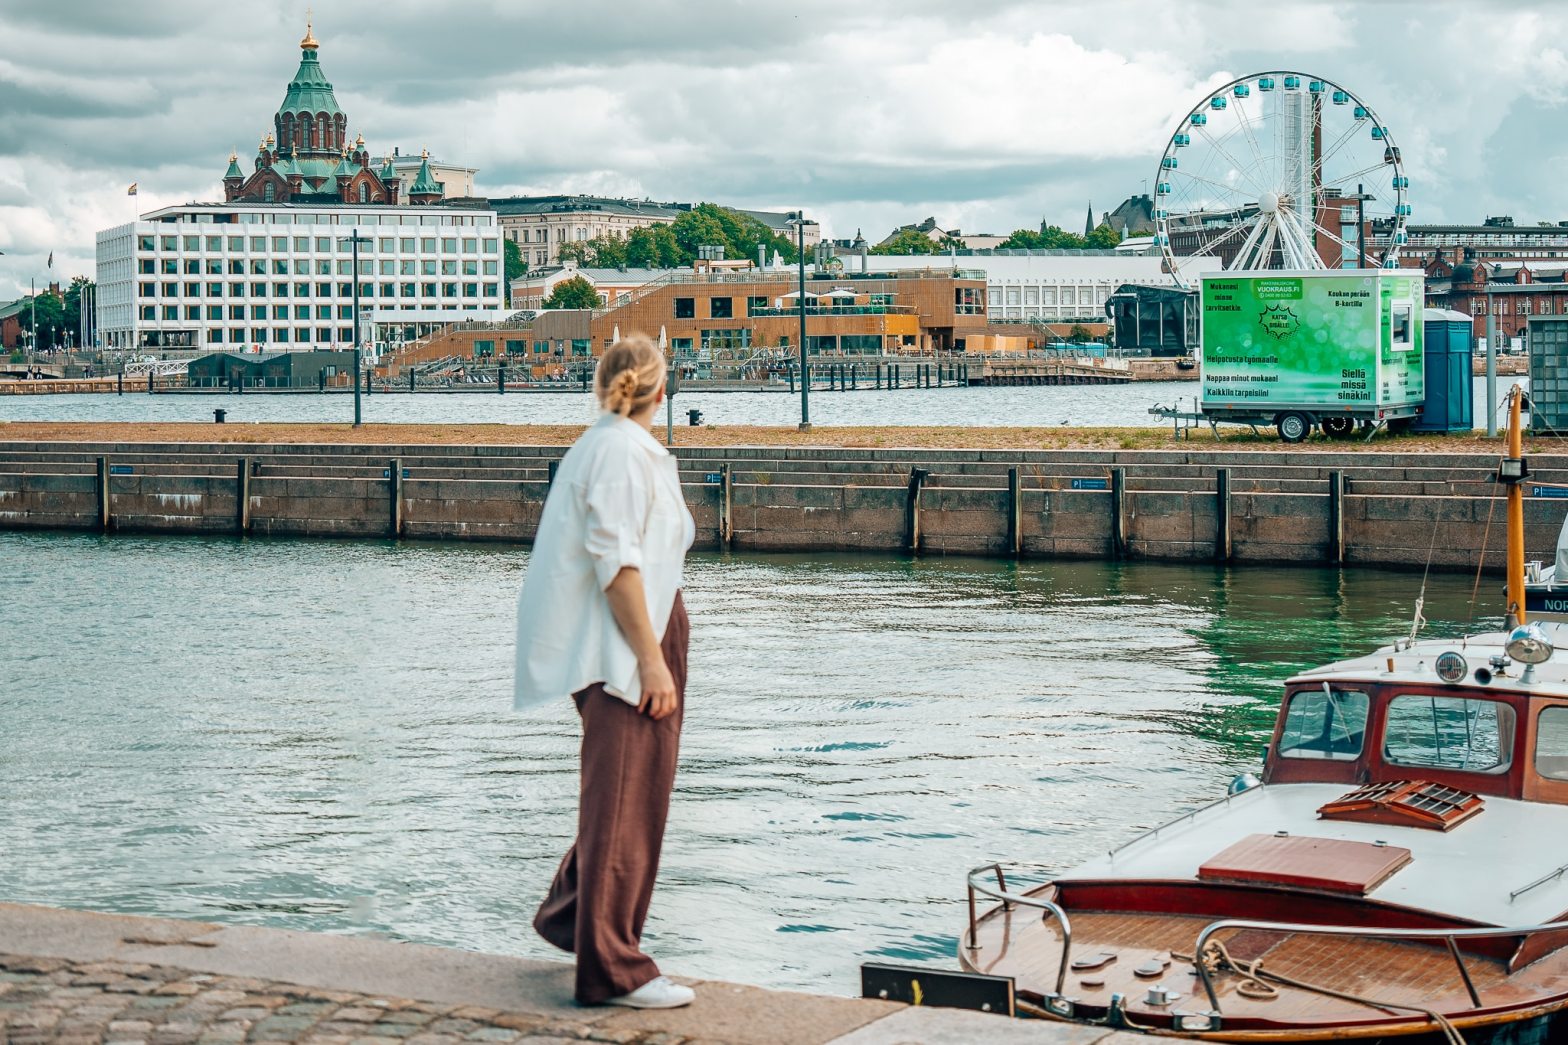 Woman standing in front of a boat with the Helsinki cityscape in the background